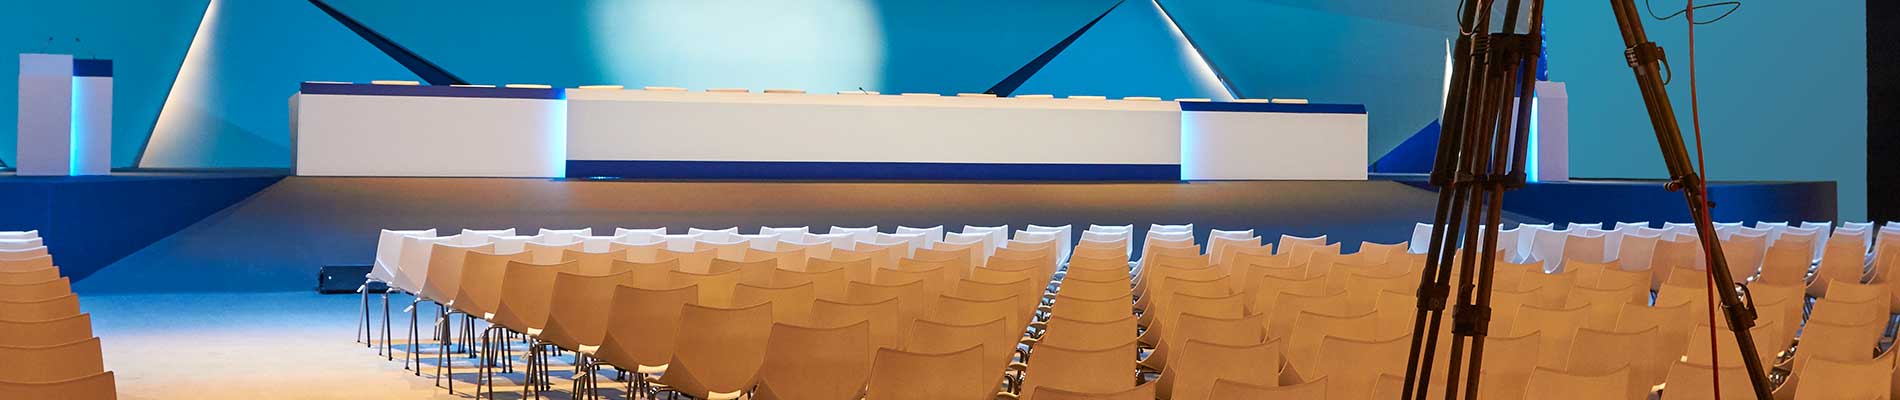 empty-chairs-organized-in-rows-with-stage-in-background-prepped-for-Florida-NENA-conference-where-next-generation-911-speaking-engagements-will-be-held